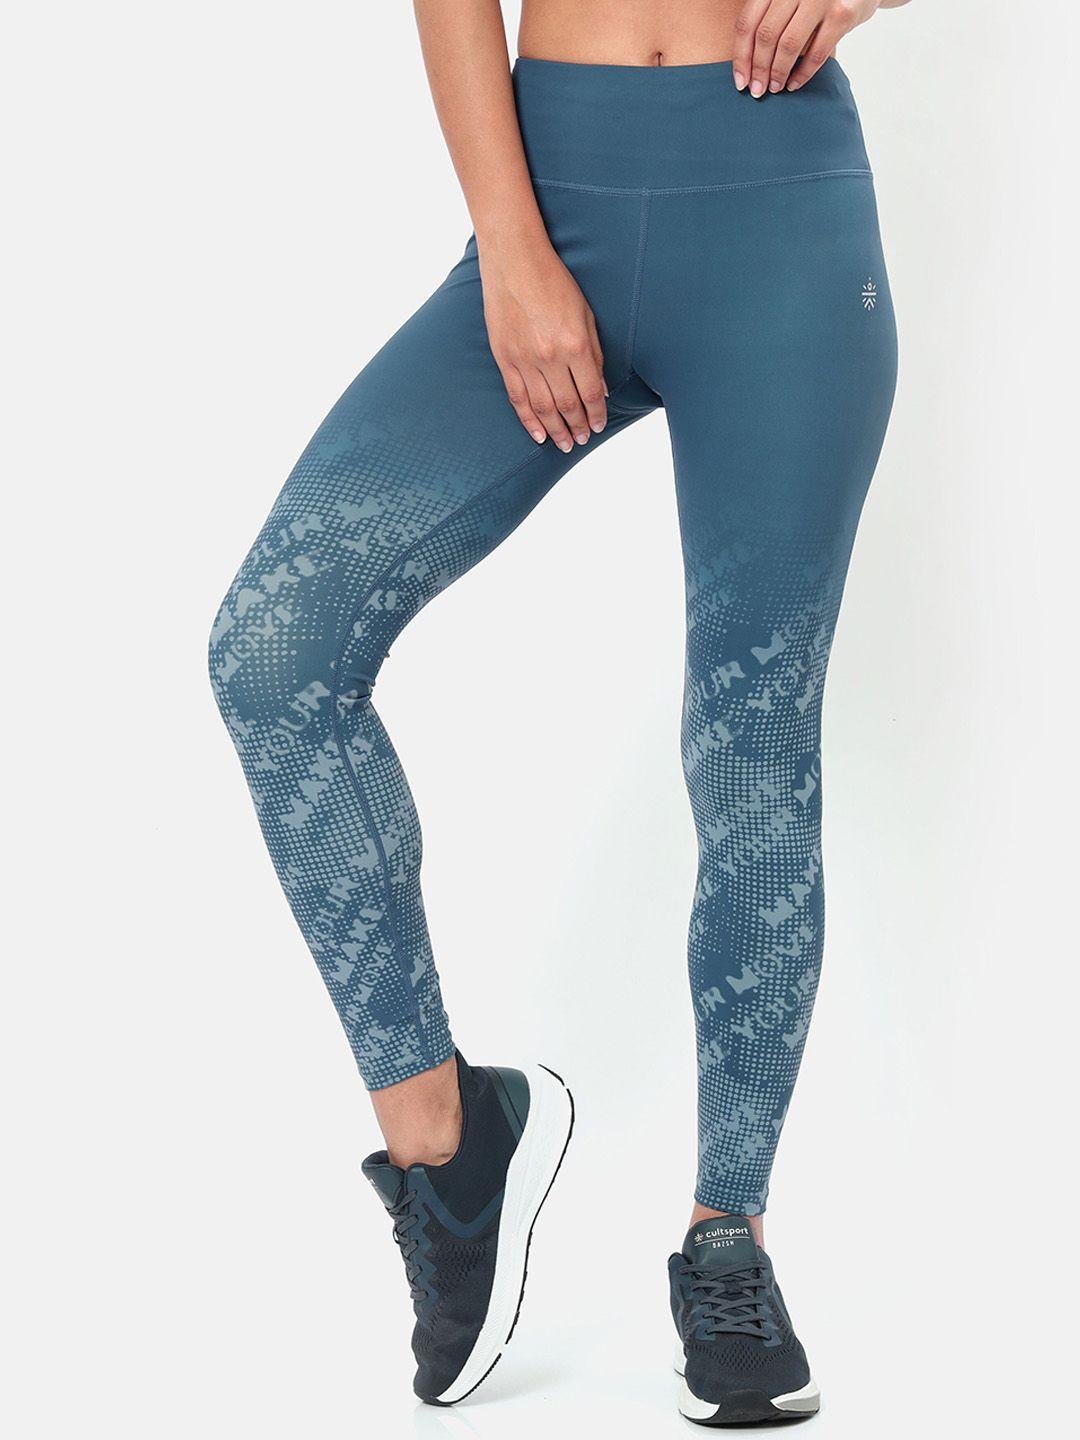 cultsport women typography print absolute fit tights